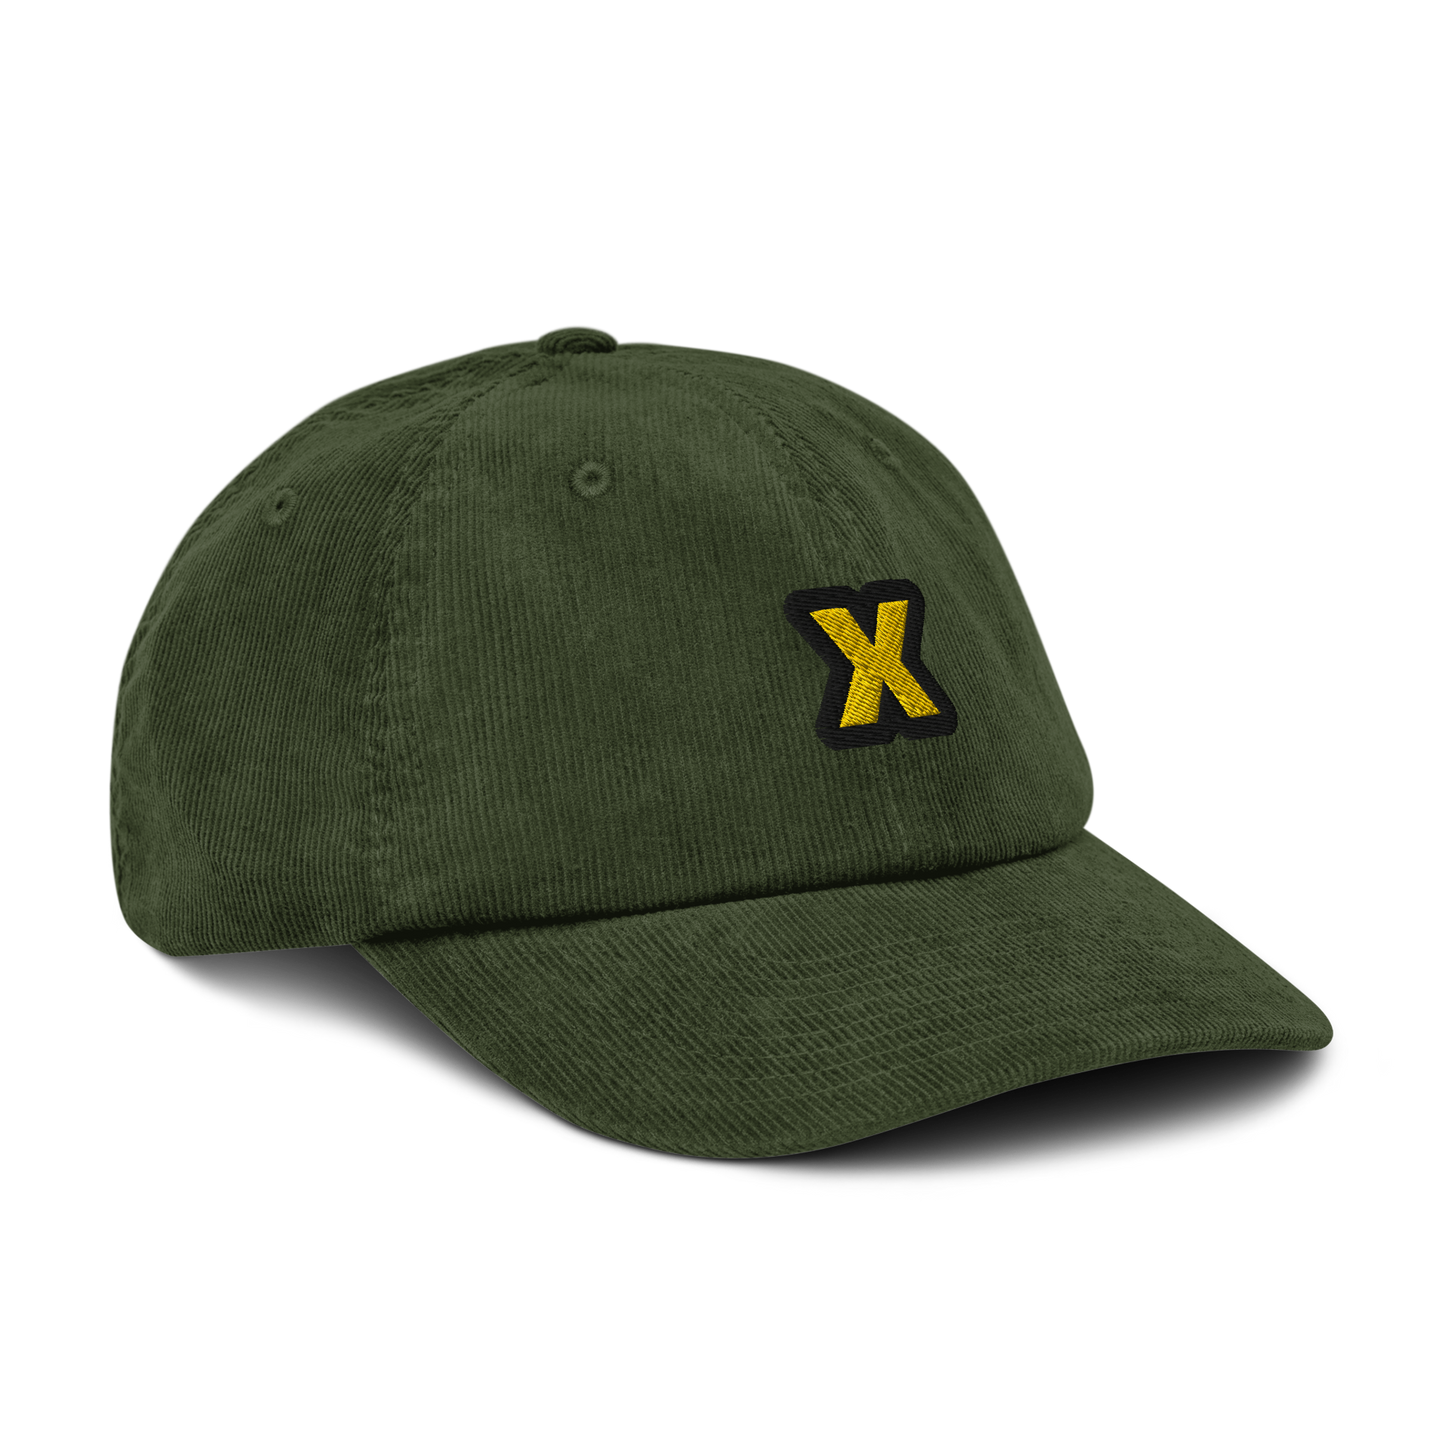 X - The letter collection - Corduroy hat